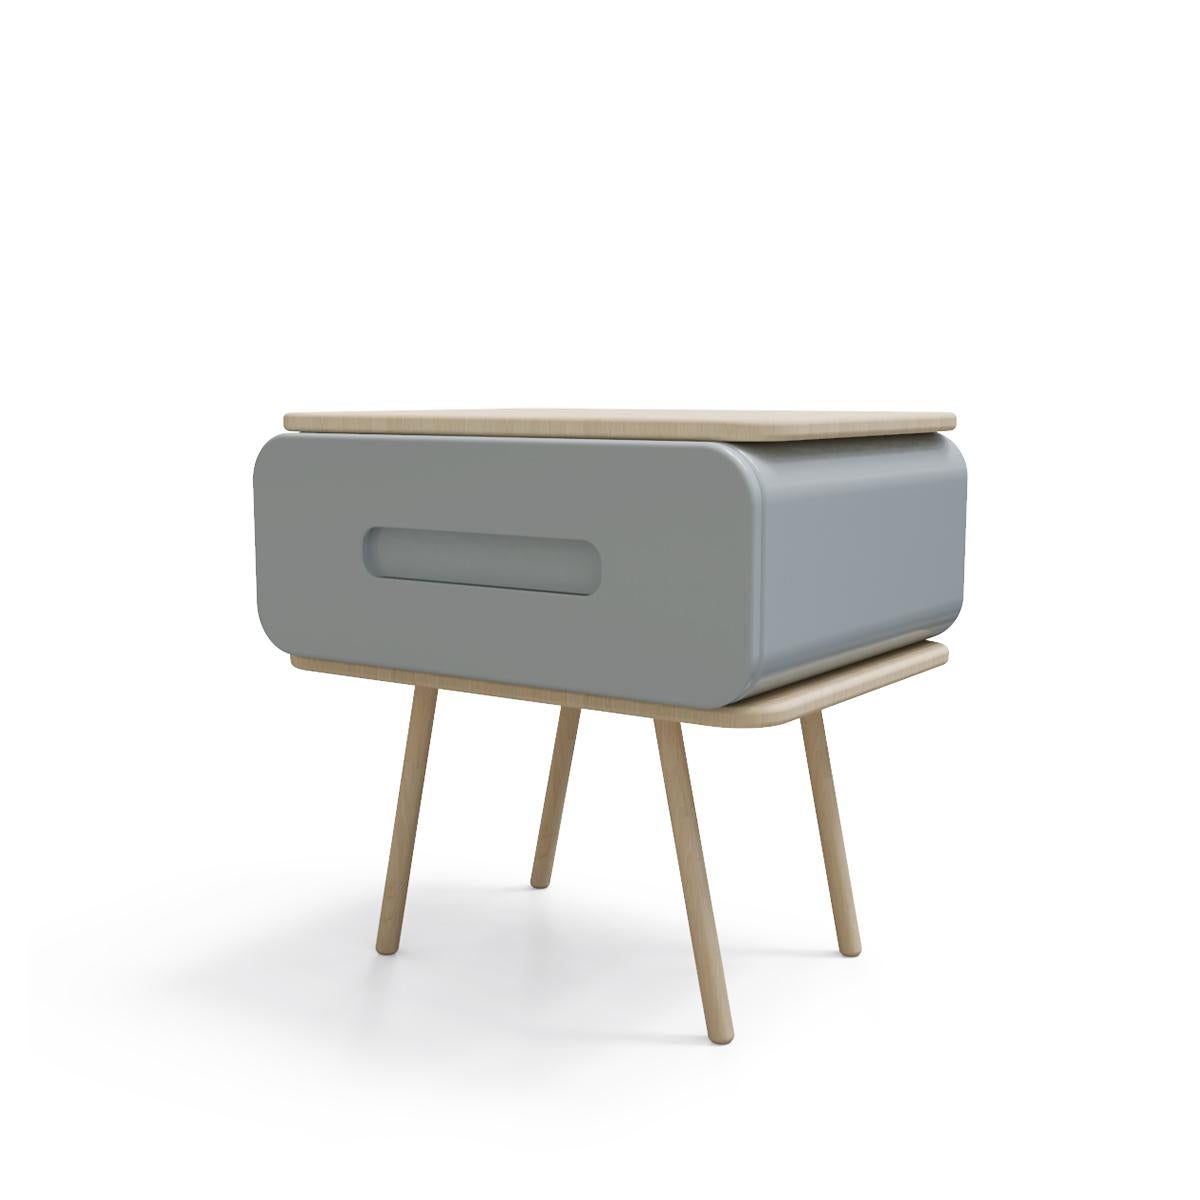 Bring a Minimalist style to your living room with this unique nightstand. Seti nightstand showcase a rectangular metal clean-lined silhouette on four round legs featuring a contrasting finish.
Easily used as an end table or as a